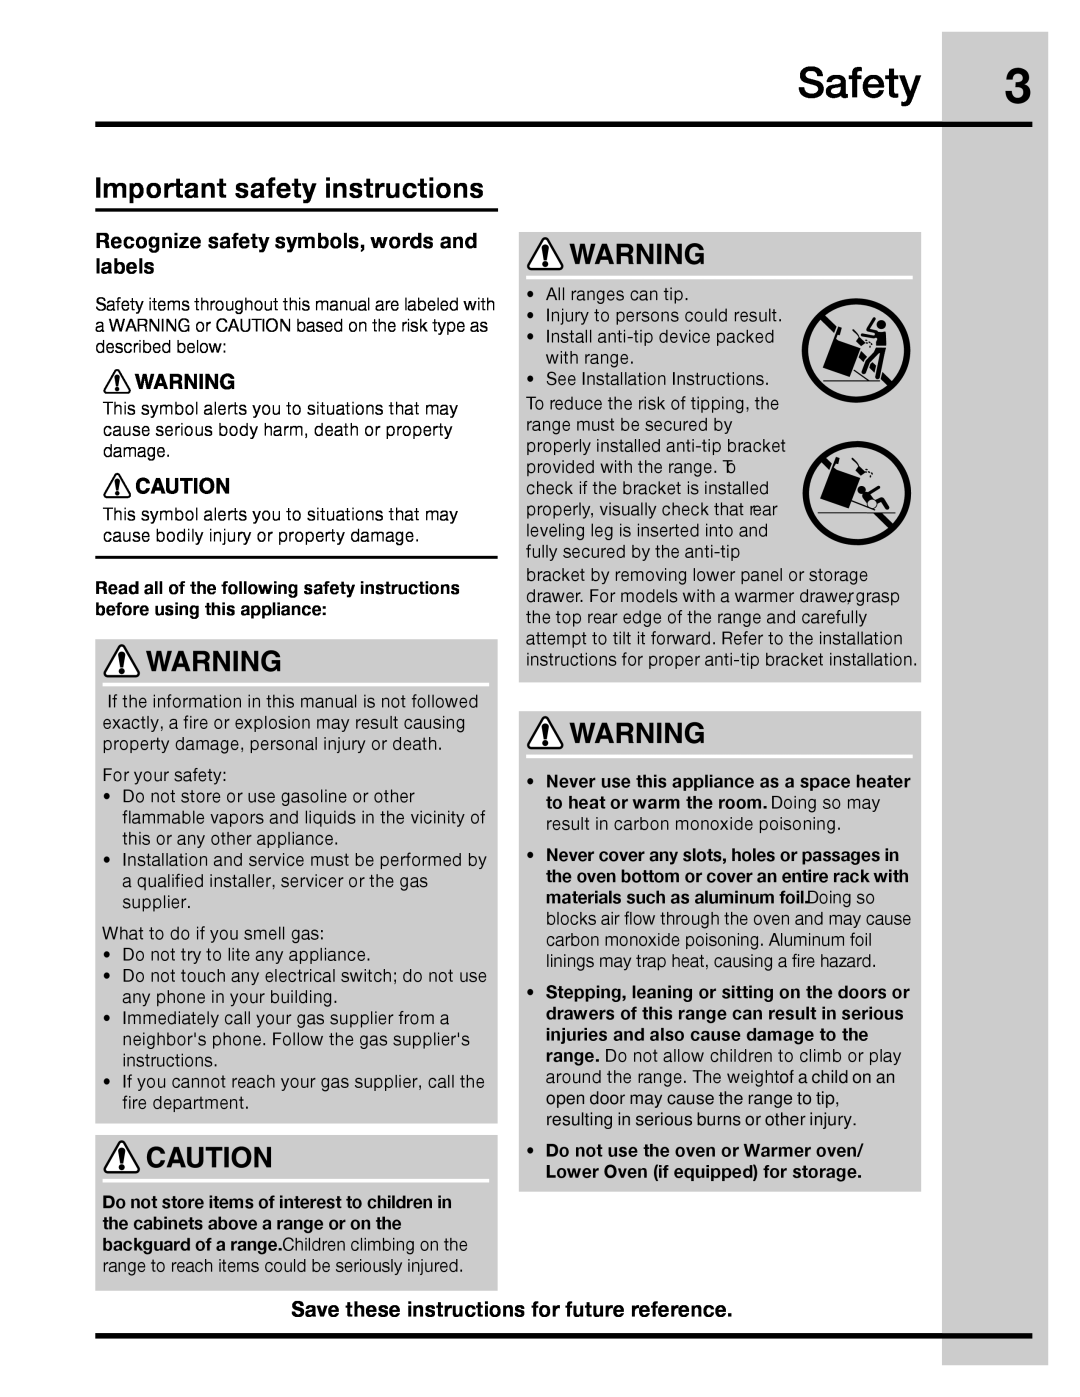 Electrolux 316471113 manual Safety, Important safety instructions, Recognize safety symbols, words and labels 